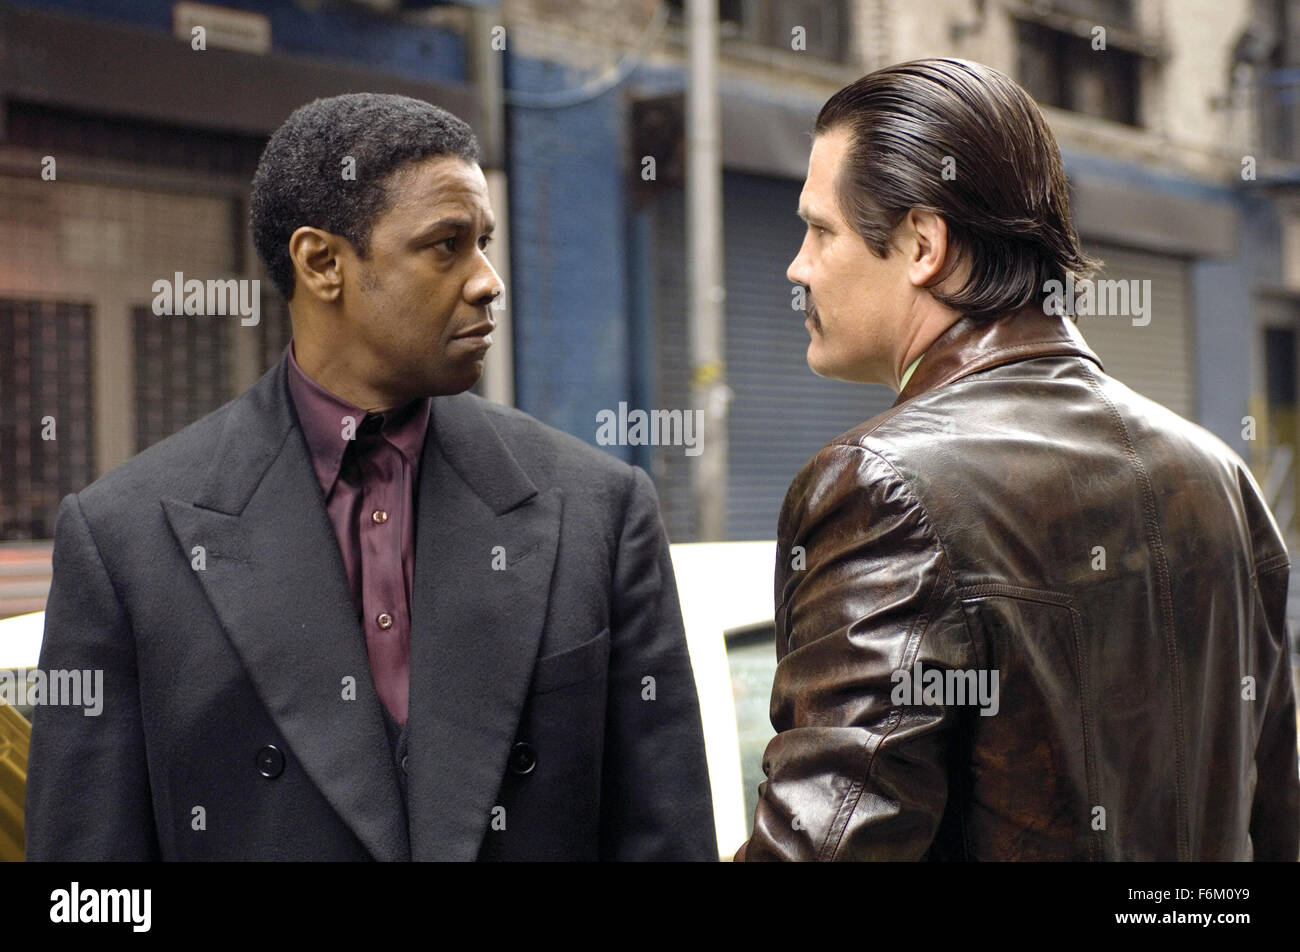 RELEASE DATE: November 2, 2007. MOVIE TITLE: American Gangster - STUDIO: Universal Pictures. PLOT: A drug lord smuggles heroin into Harlem during the 1970s by hiding the stash inside the coffins of American soldiers returning from Vietnam. PICTURED: Gangster Frank Lucas (DENZEL WASHINGTON) confronts crooked Detective Trupo (JOSH BROLIN). Stock Photo